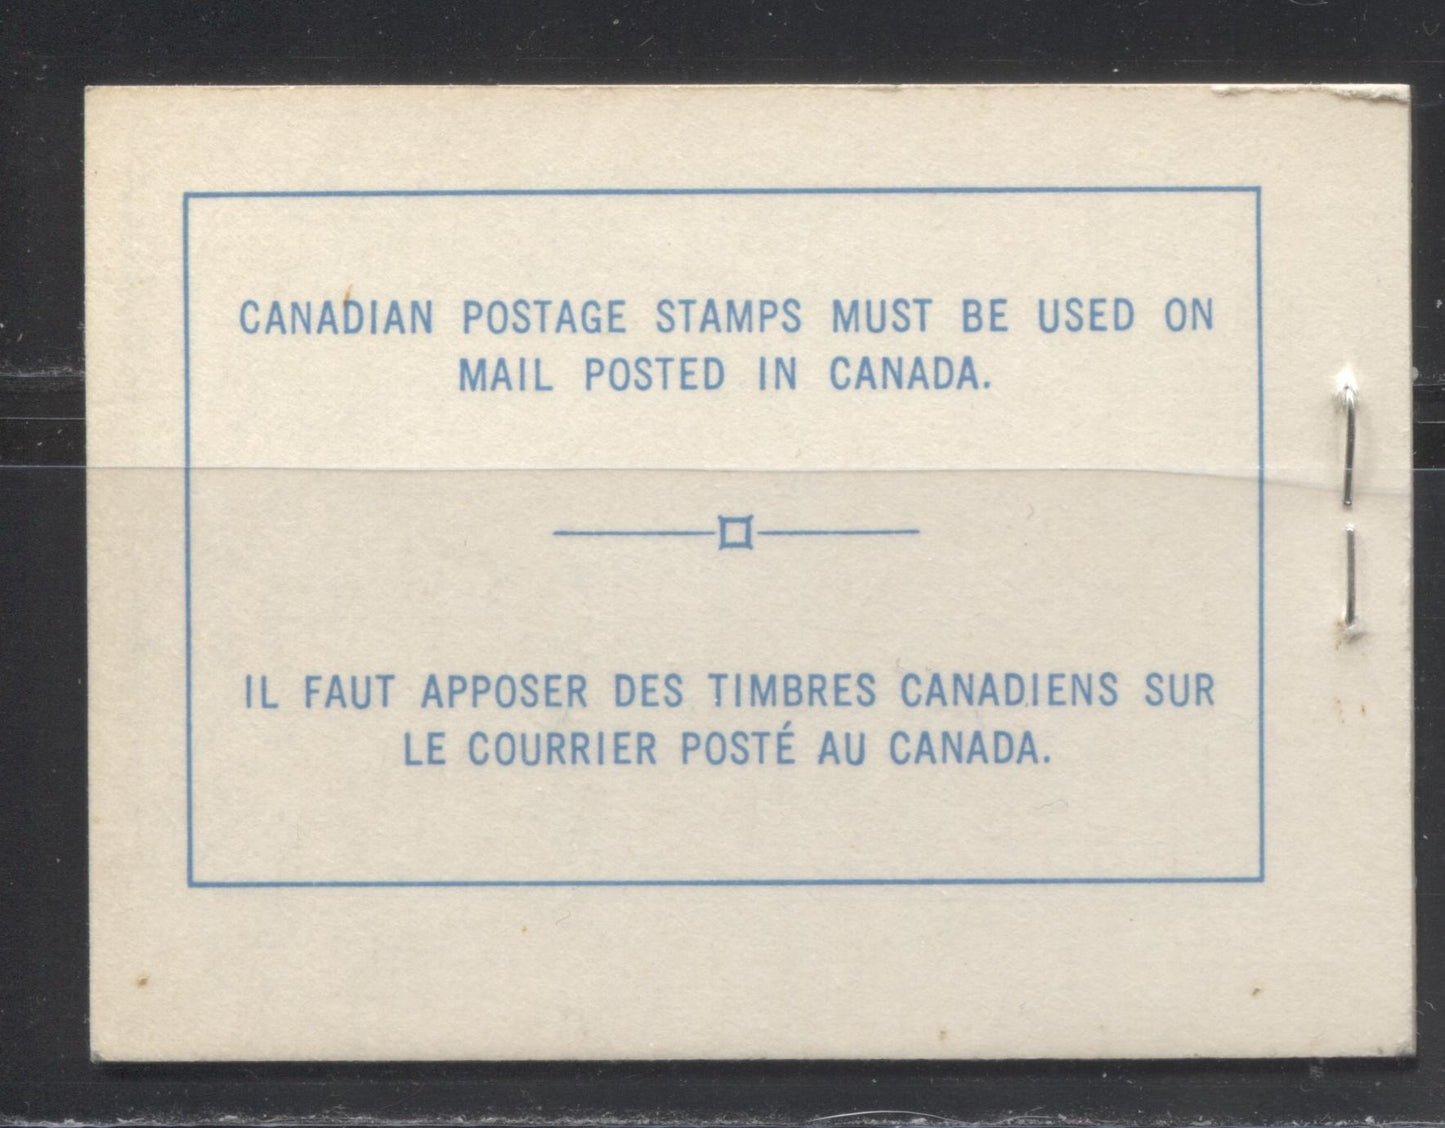 Lot 222 Canada #BK55 25c Centennial Booklet Bright Blue DF-fl Cream/DF Ivory Covers,  DF-fl Pane, Cutting Guideline on Front Cover, Smooth Dex Gum